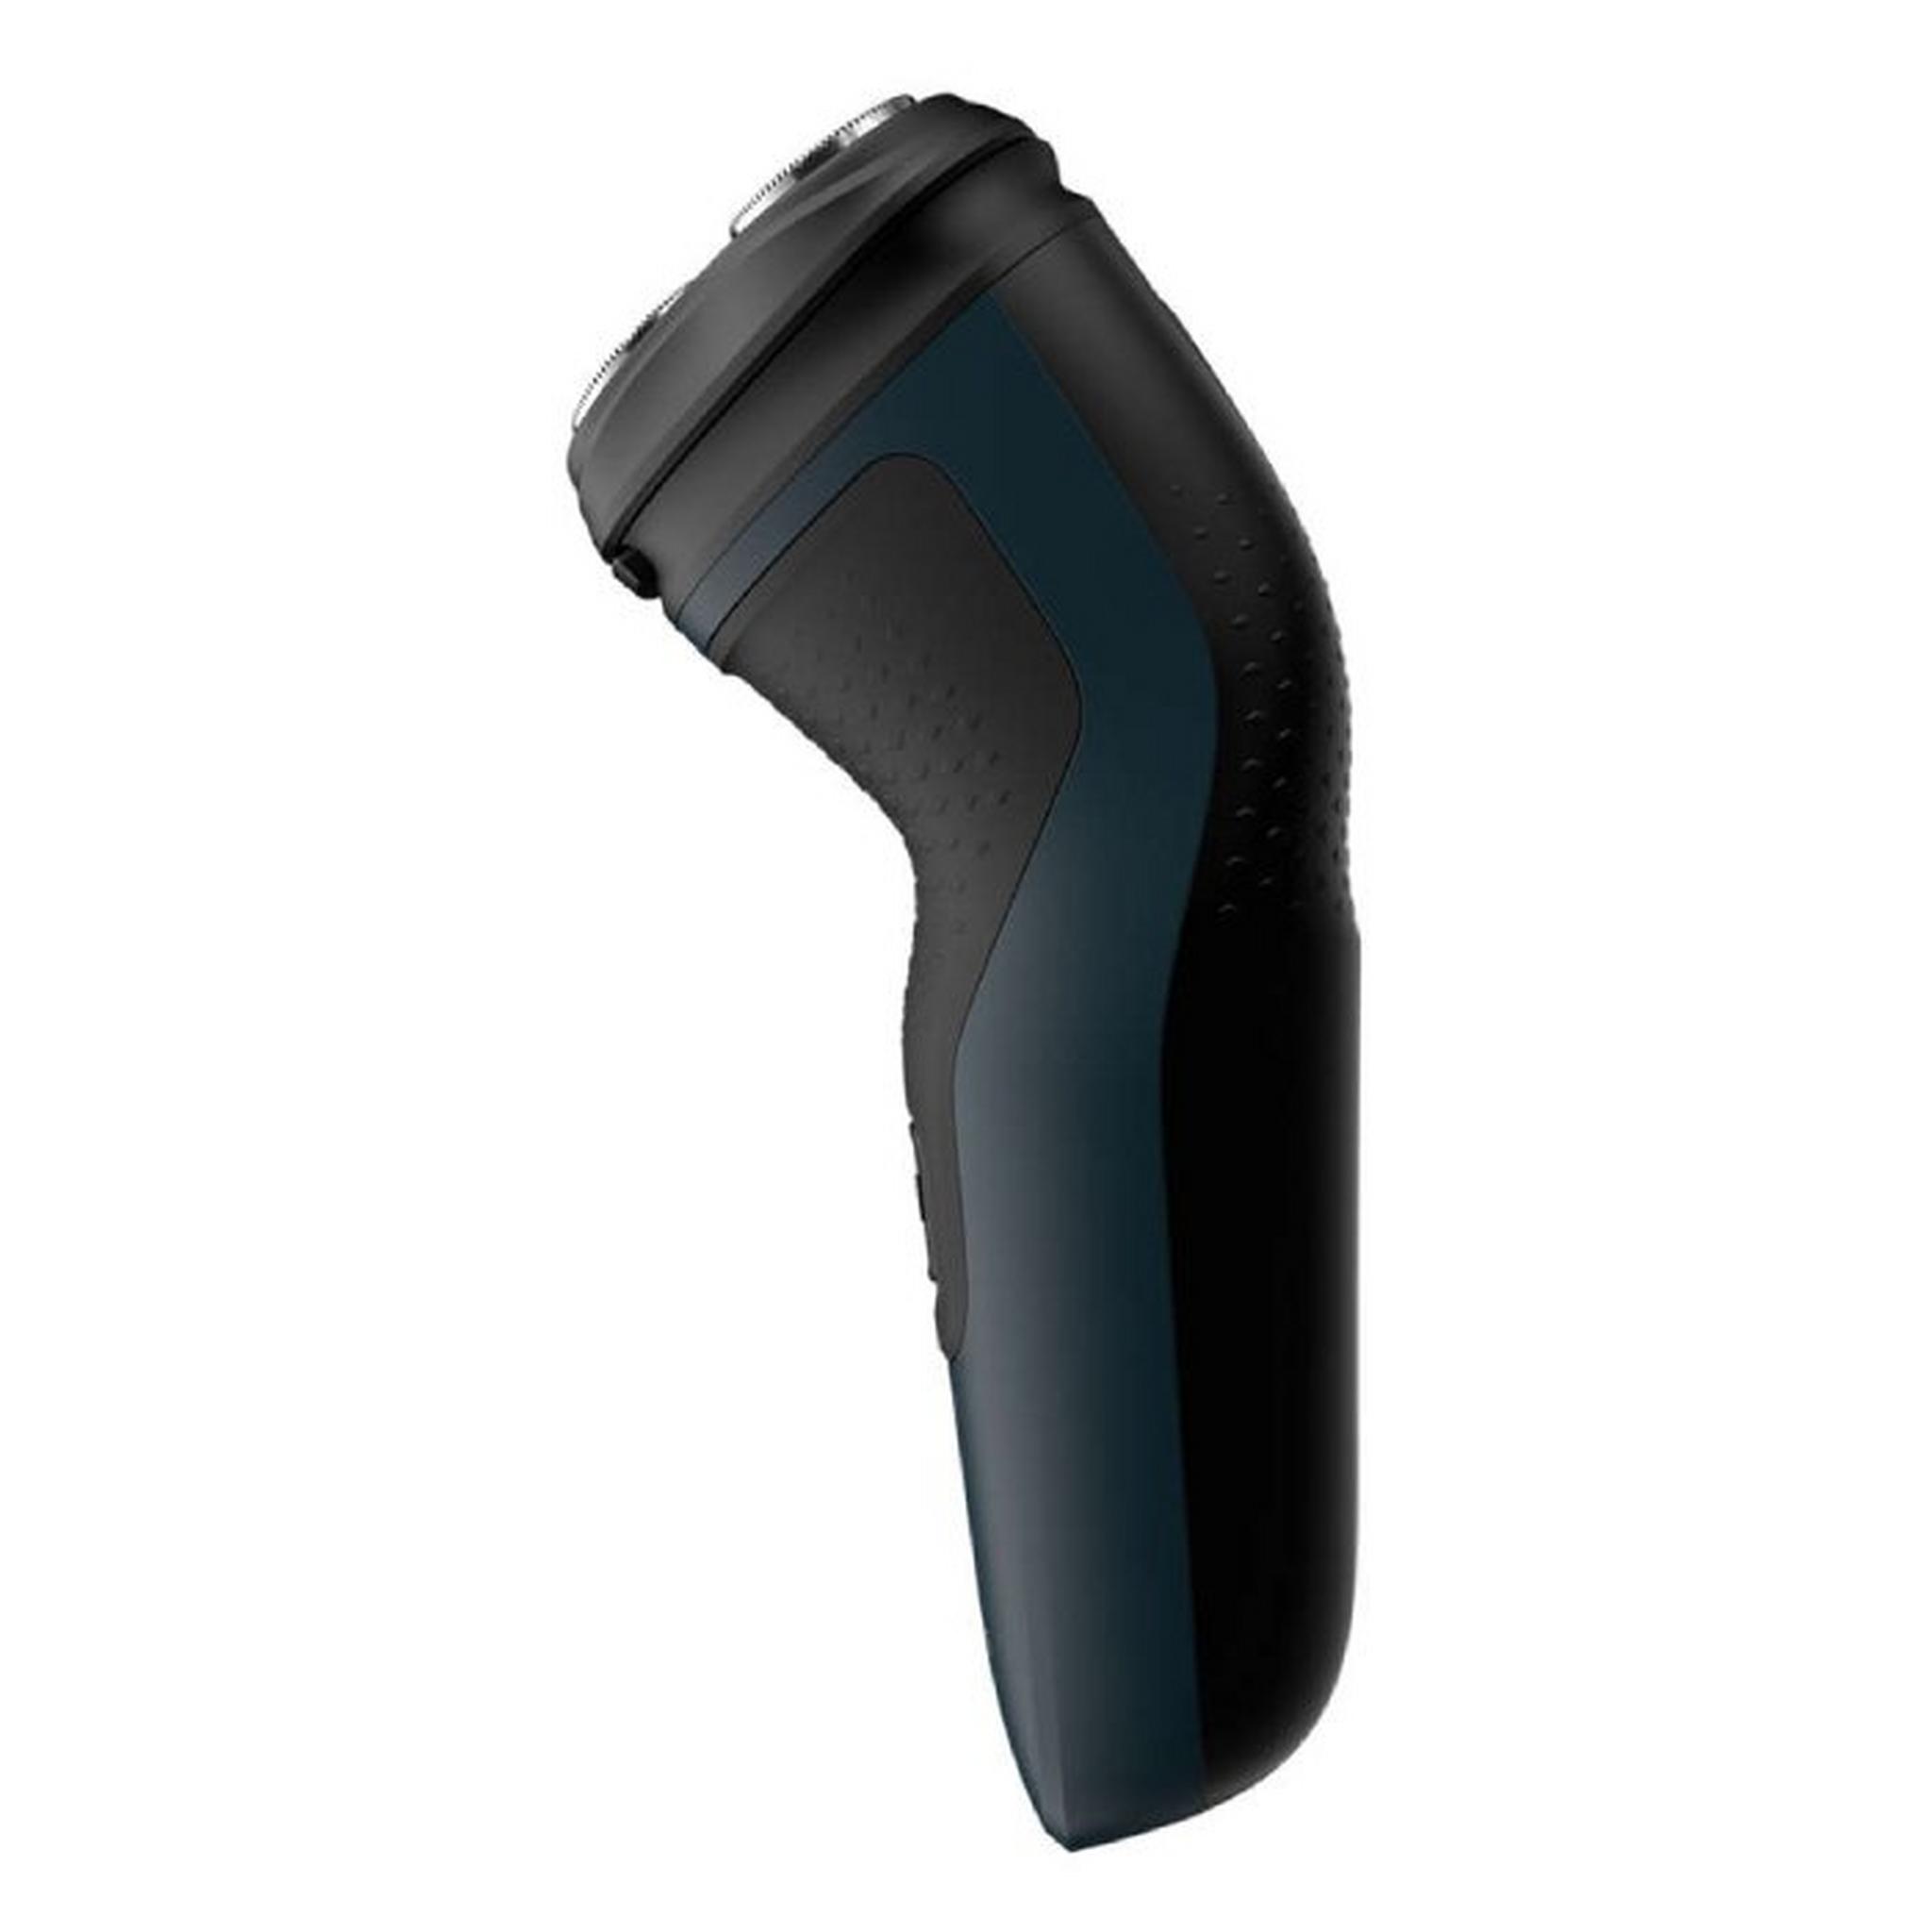 Philips Wet & Dry Electric Shaver (S1121/41)